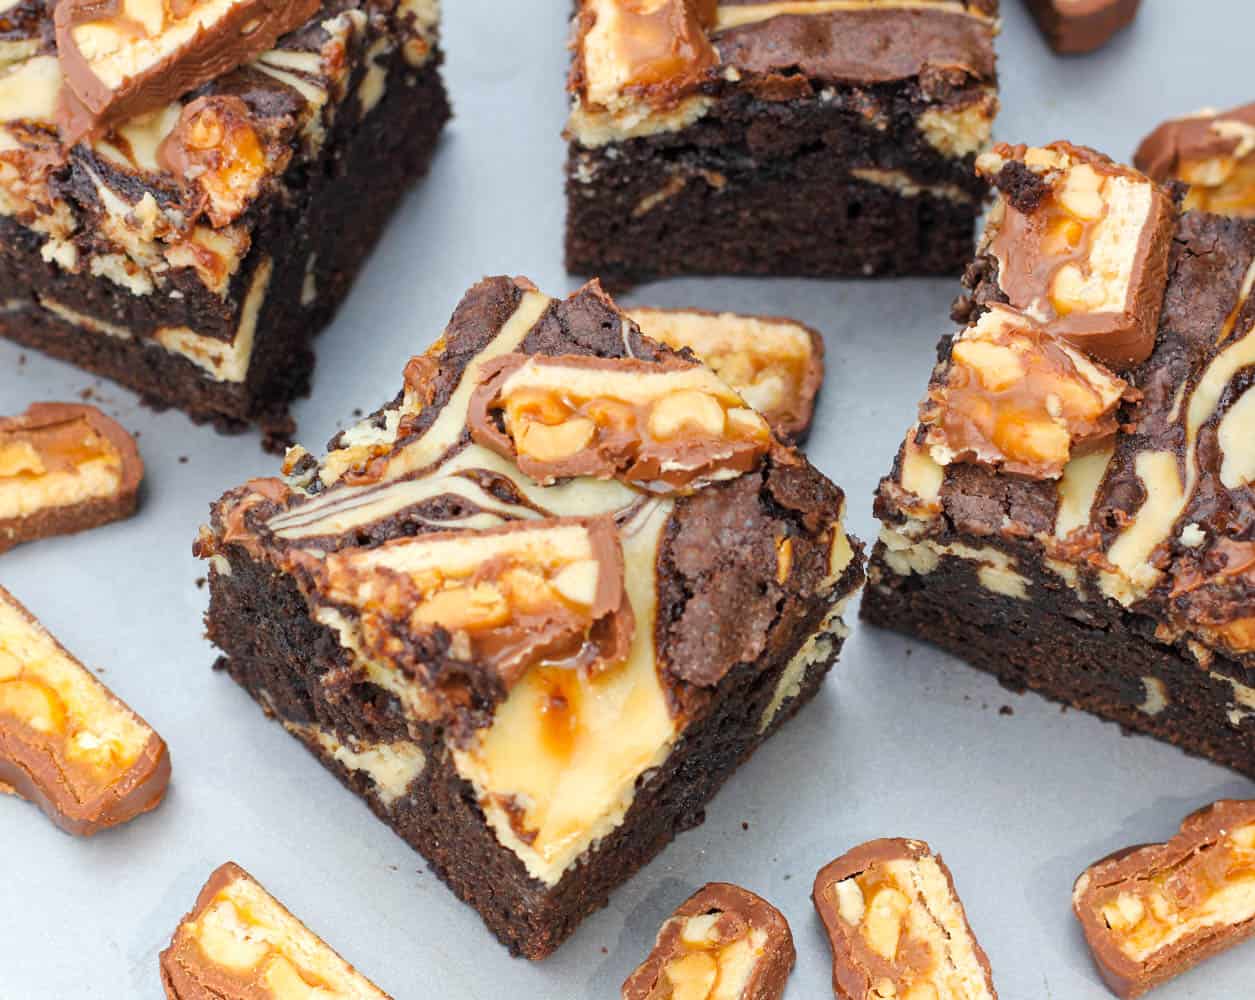 Kahlua Cheesecake Snickers Brownies recipe with candy bars and cream cheese swirl